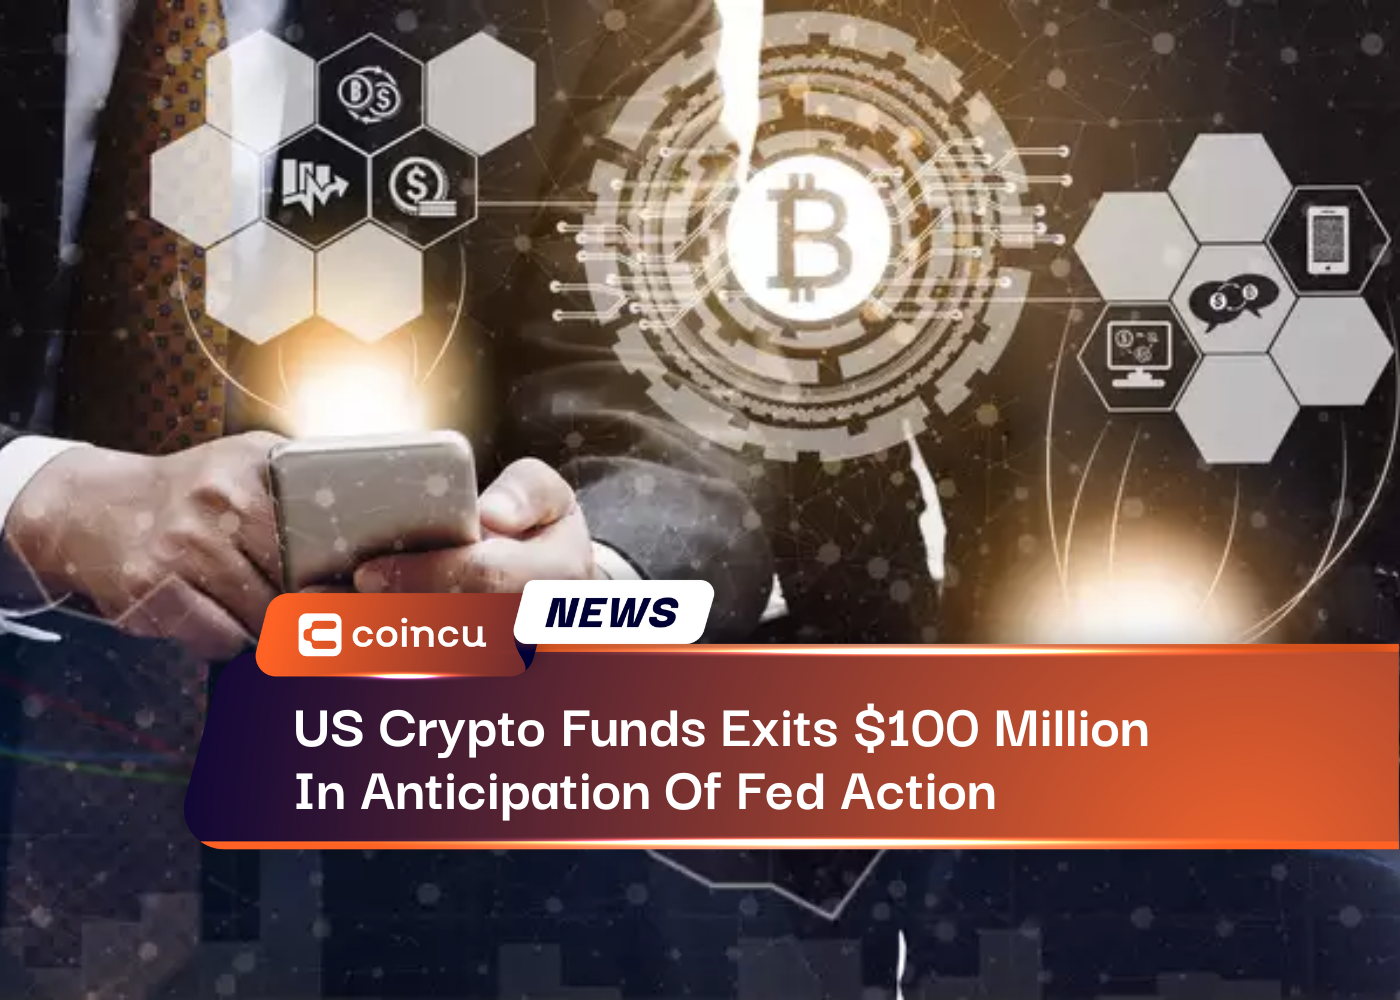 US Crypto Funds Exits $100 Million In Anticipation Of Fed Action